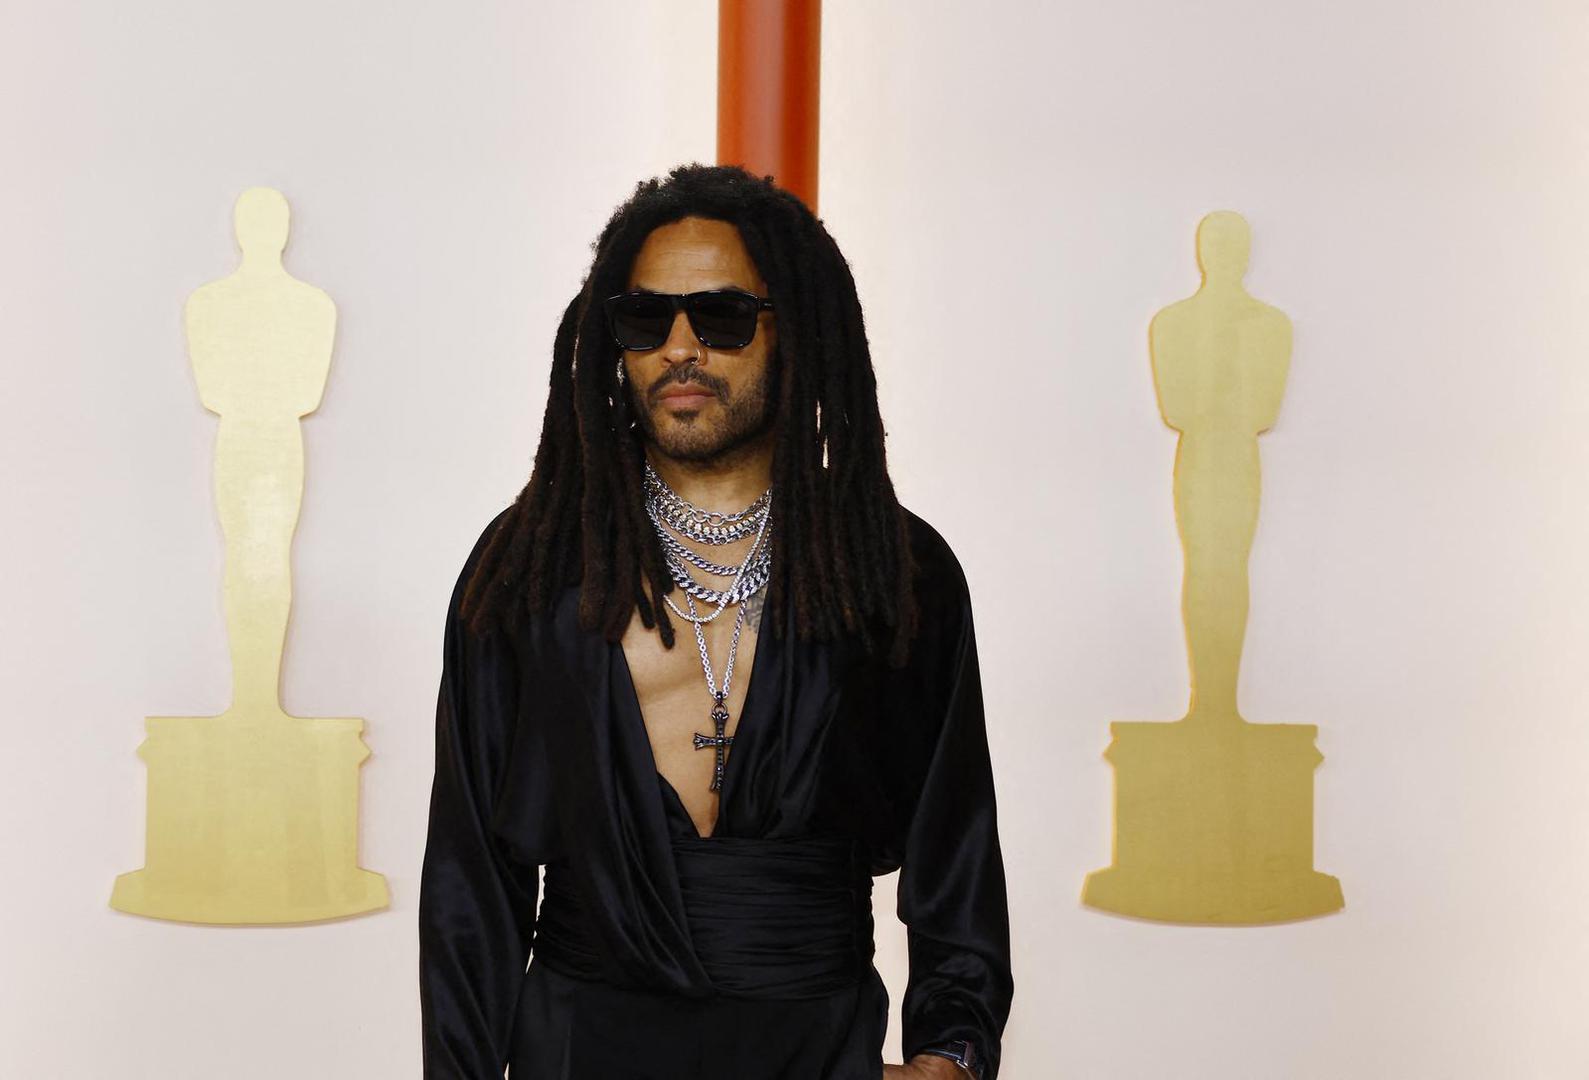 Lenny Kravitz poses on the champagne-colored red carpet during the Oscars arrivals at the 95th Academy Awards in Hollywood, Los Angeles, California, U.S., March 12, 2023. REUTERS/Eric Gaillard Photo: ERIC GAILLARD/REUTERS